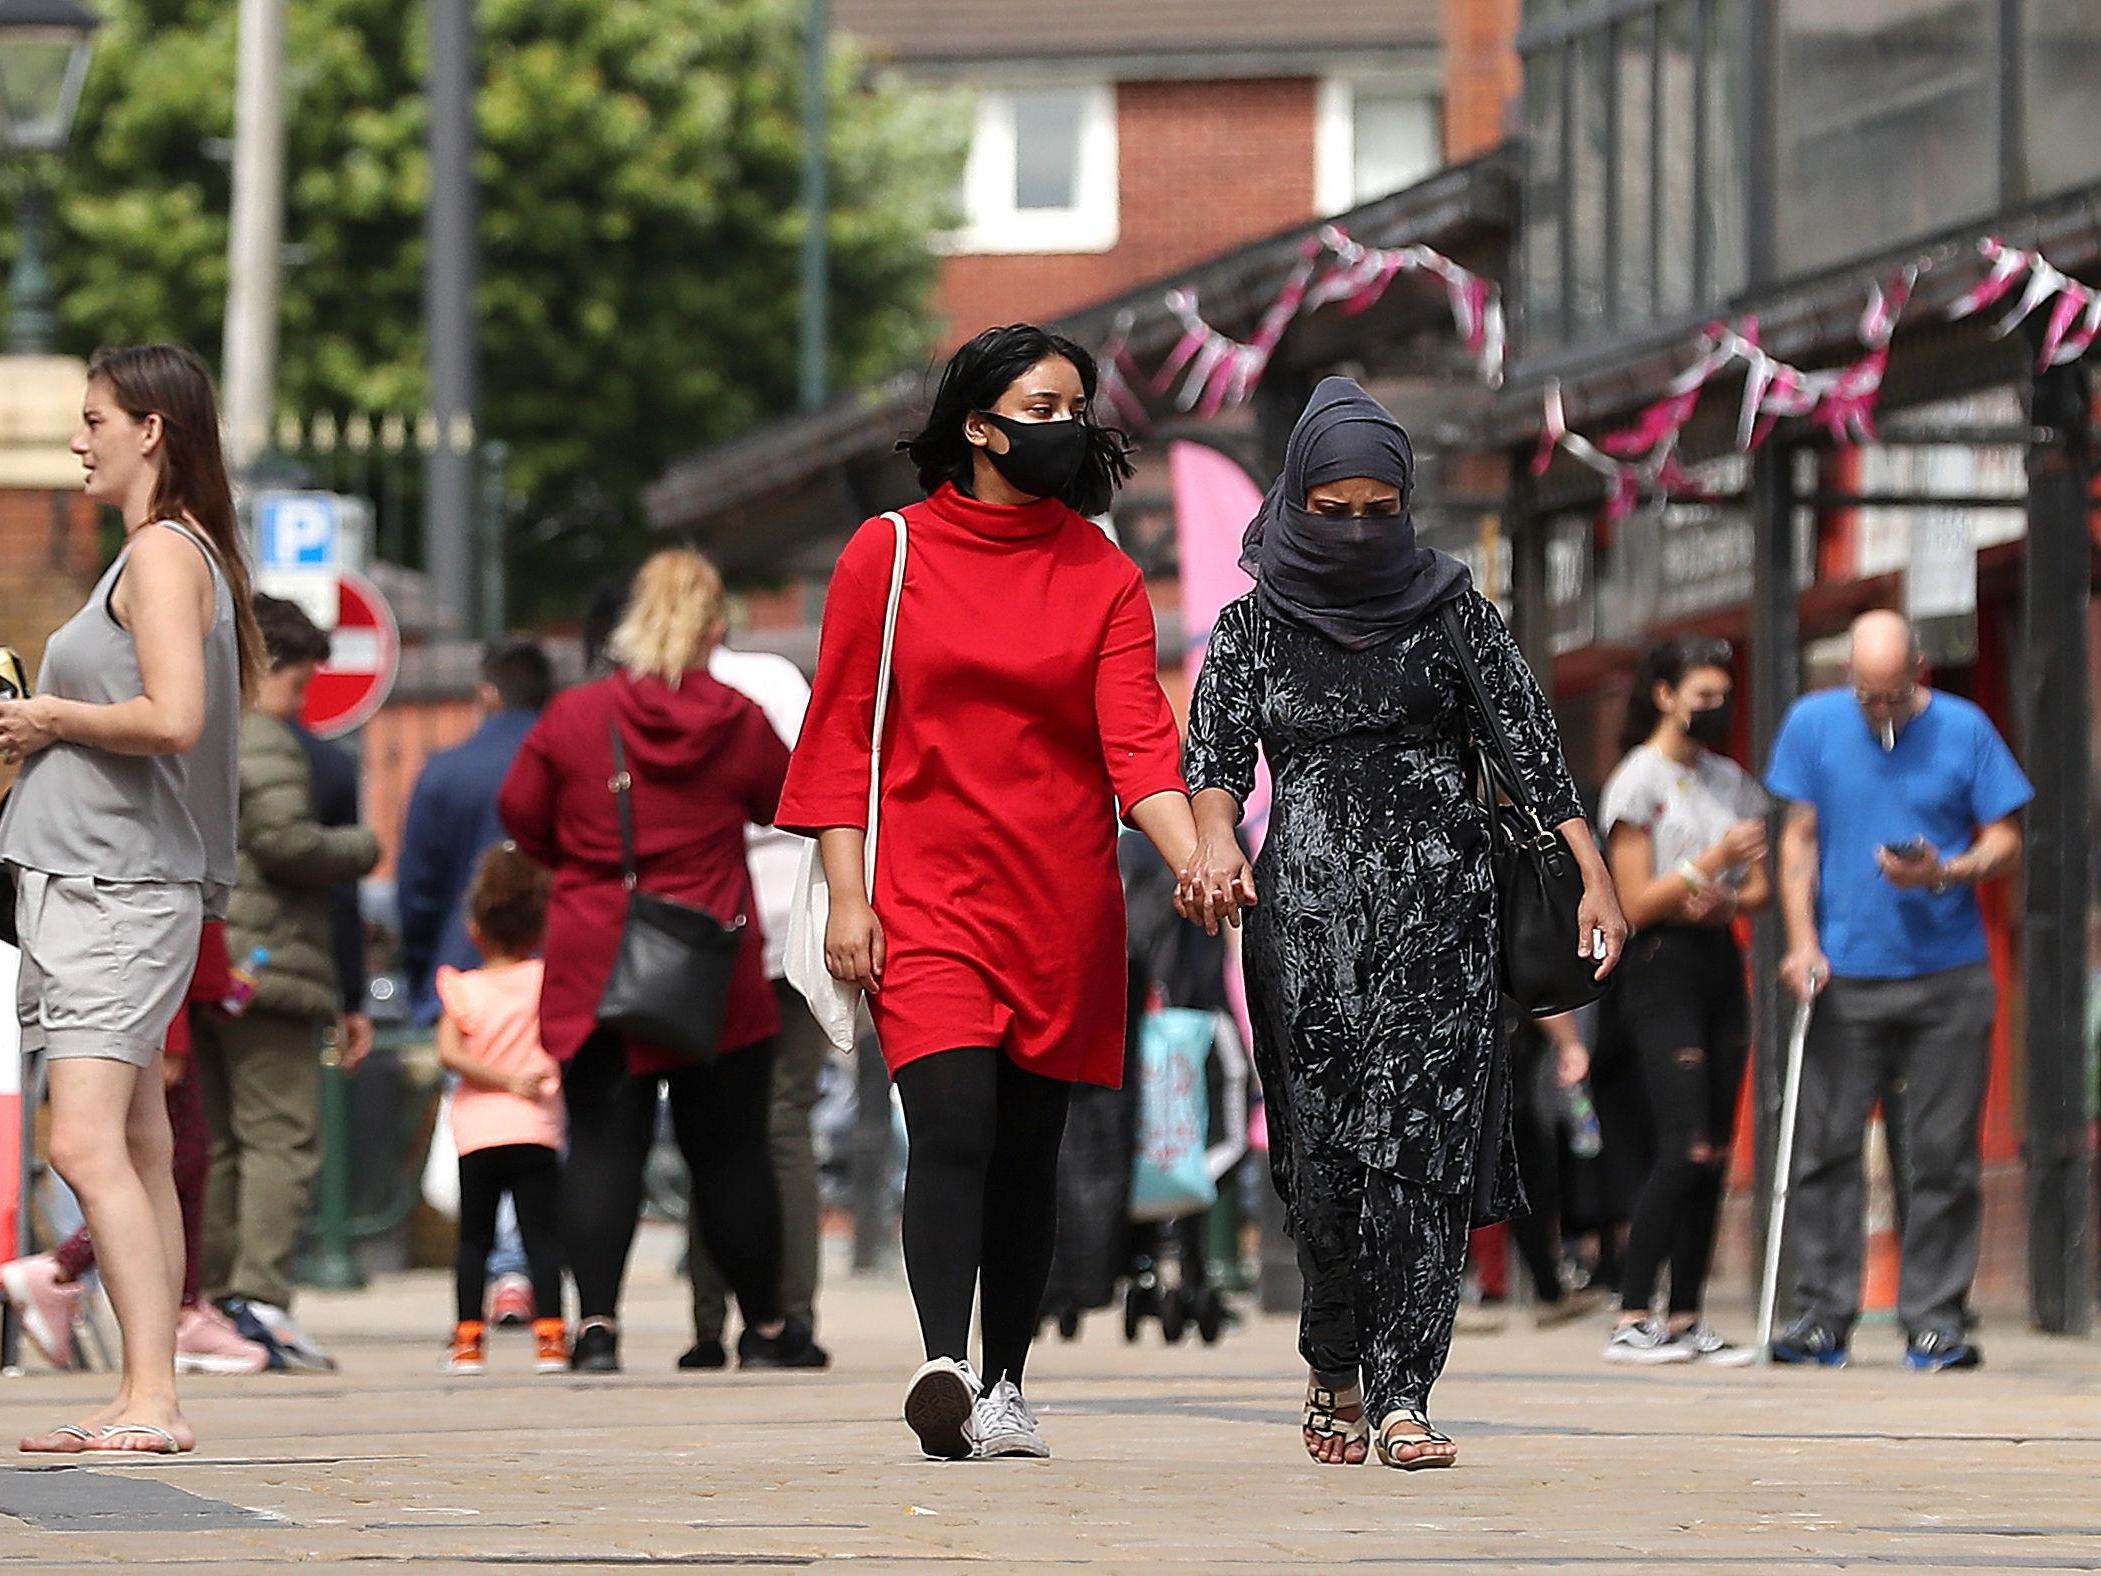 Shoppers in infection-hit Oldham where only 47 per cent of coronavirus contacts are being traced